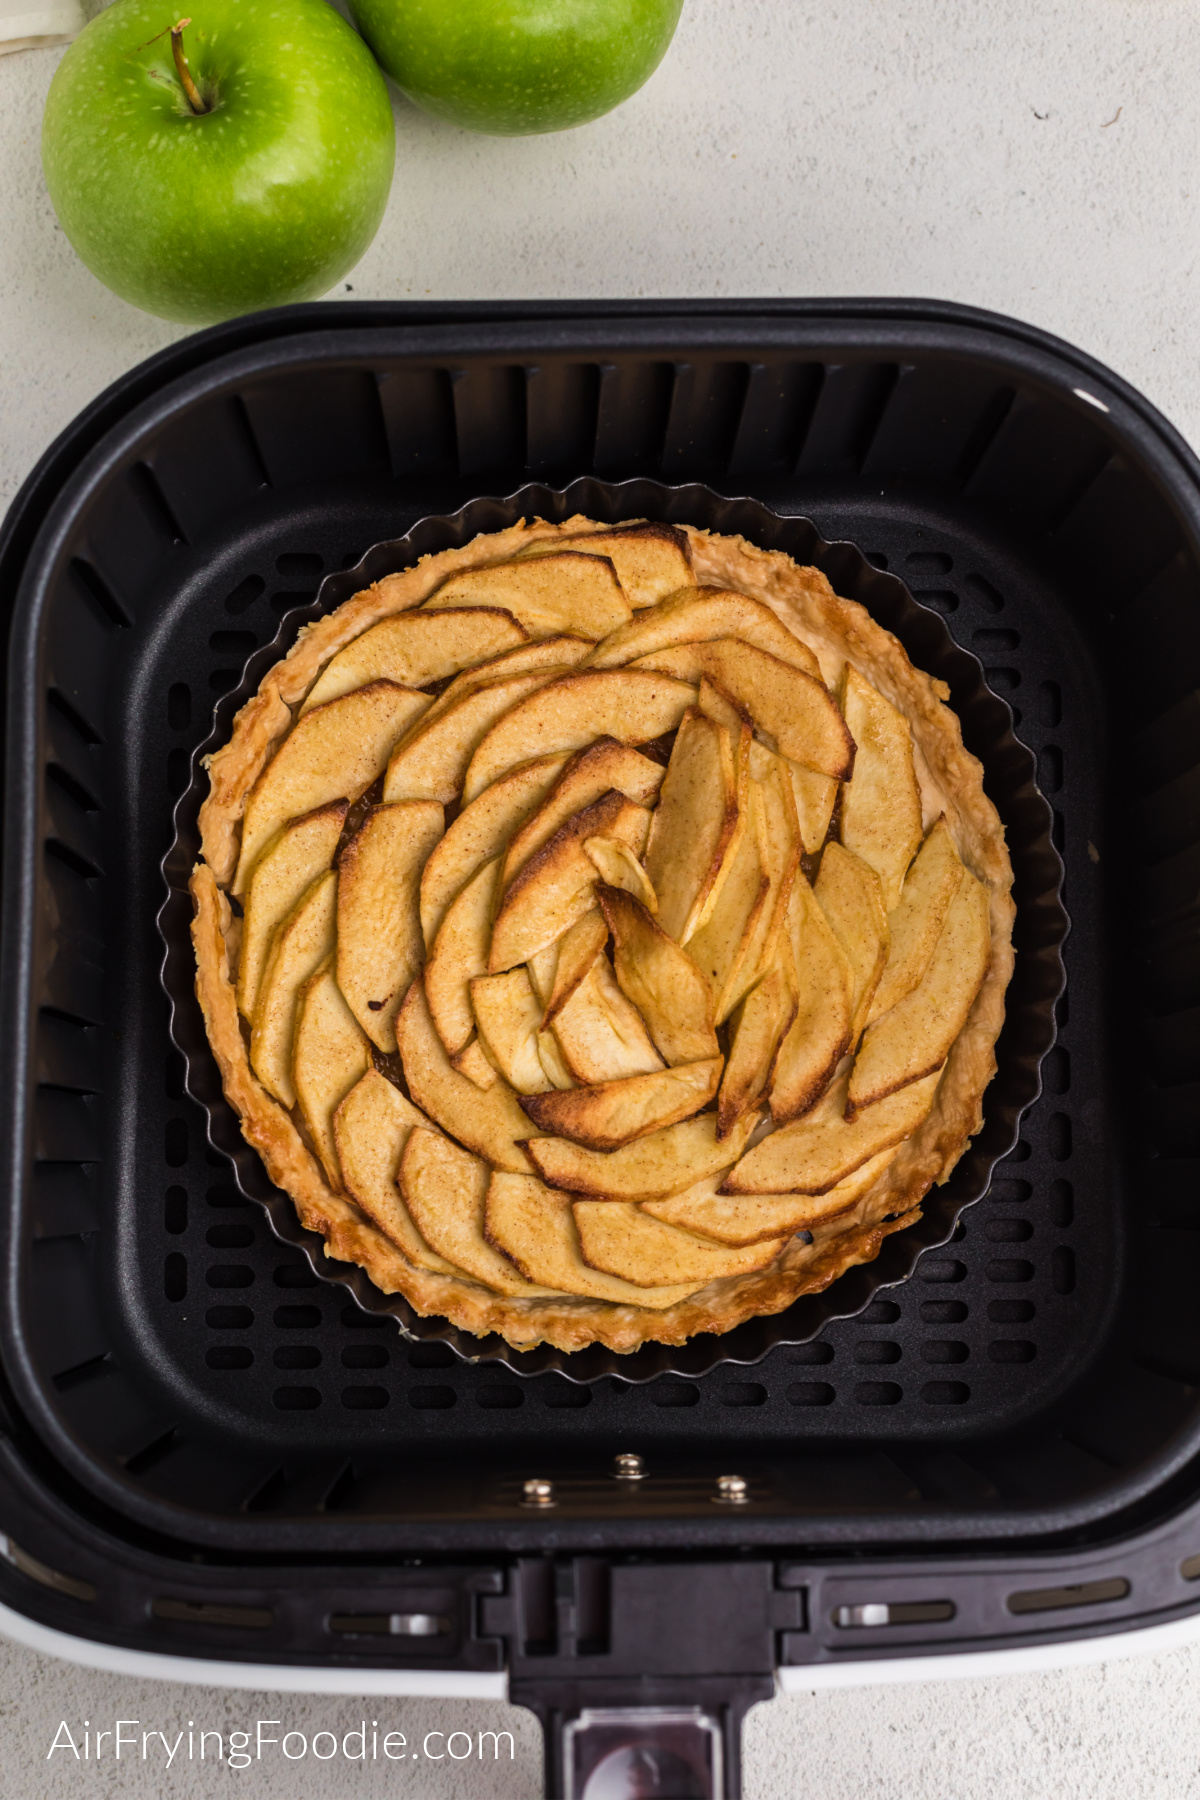 Cooked apple tart in the basket of the air fryer.